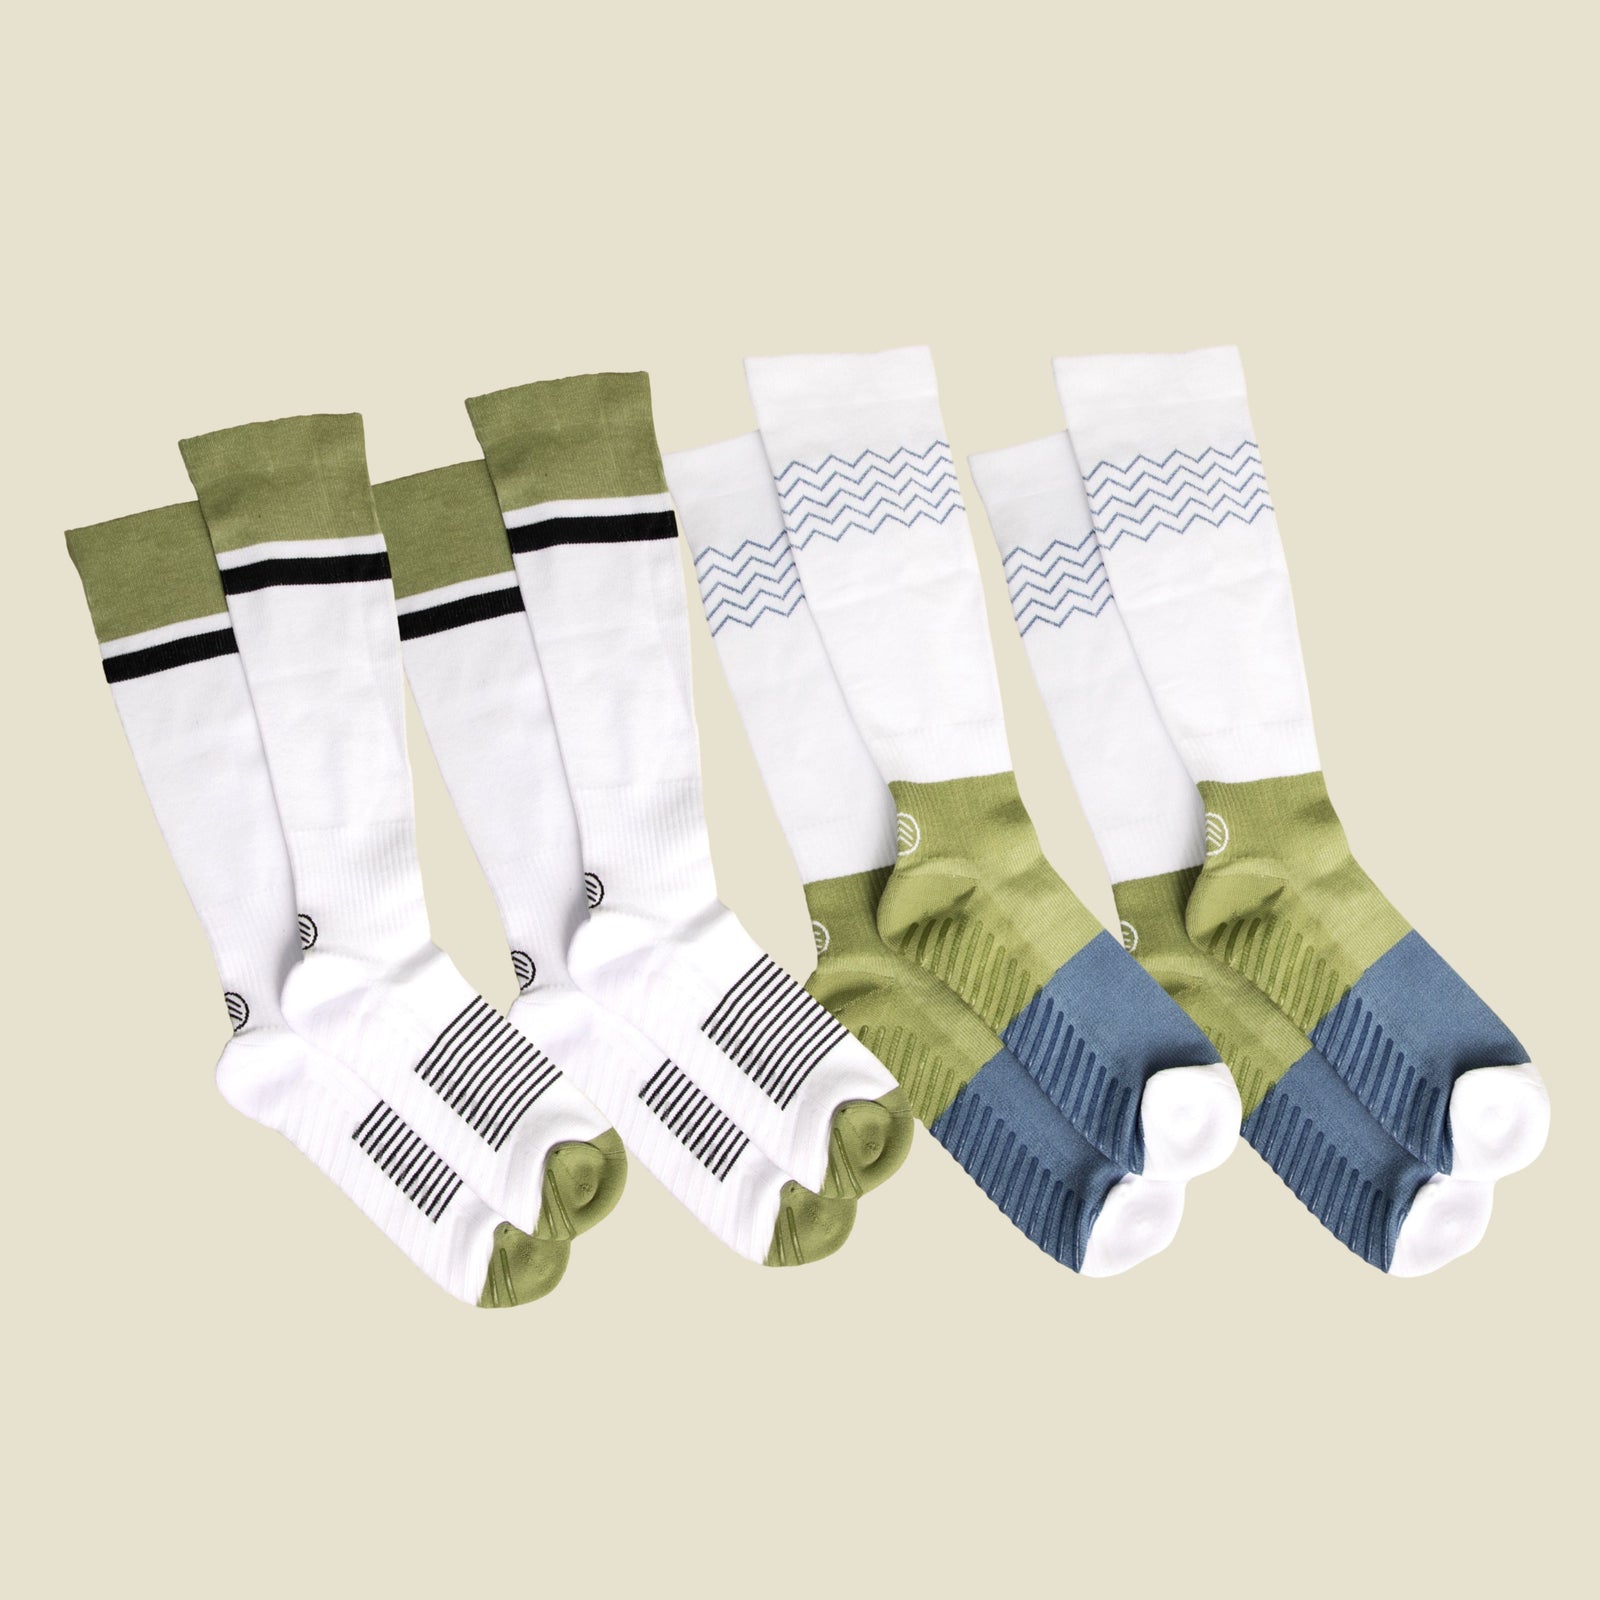 Men's White/Black/Green Compression Socks with Grips - 1 Pair